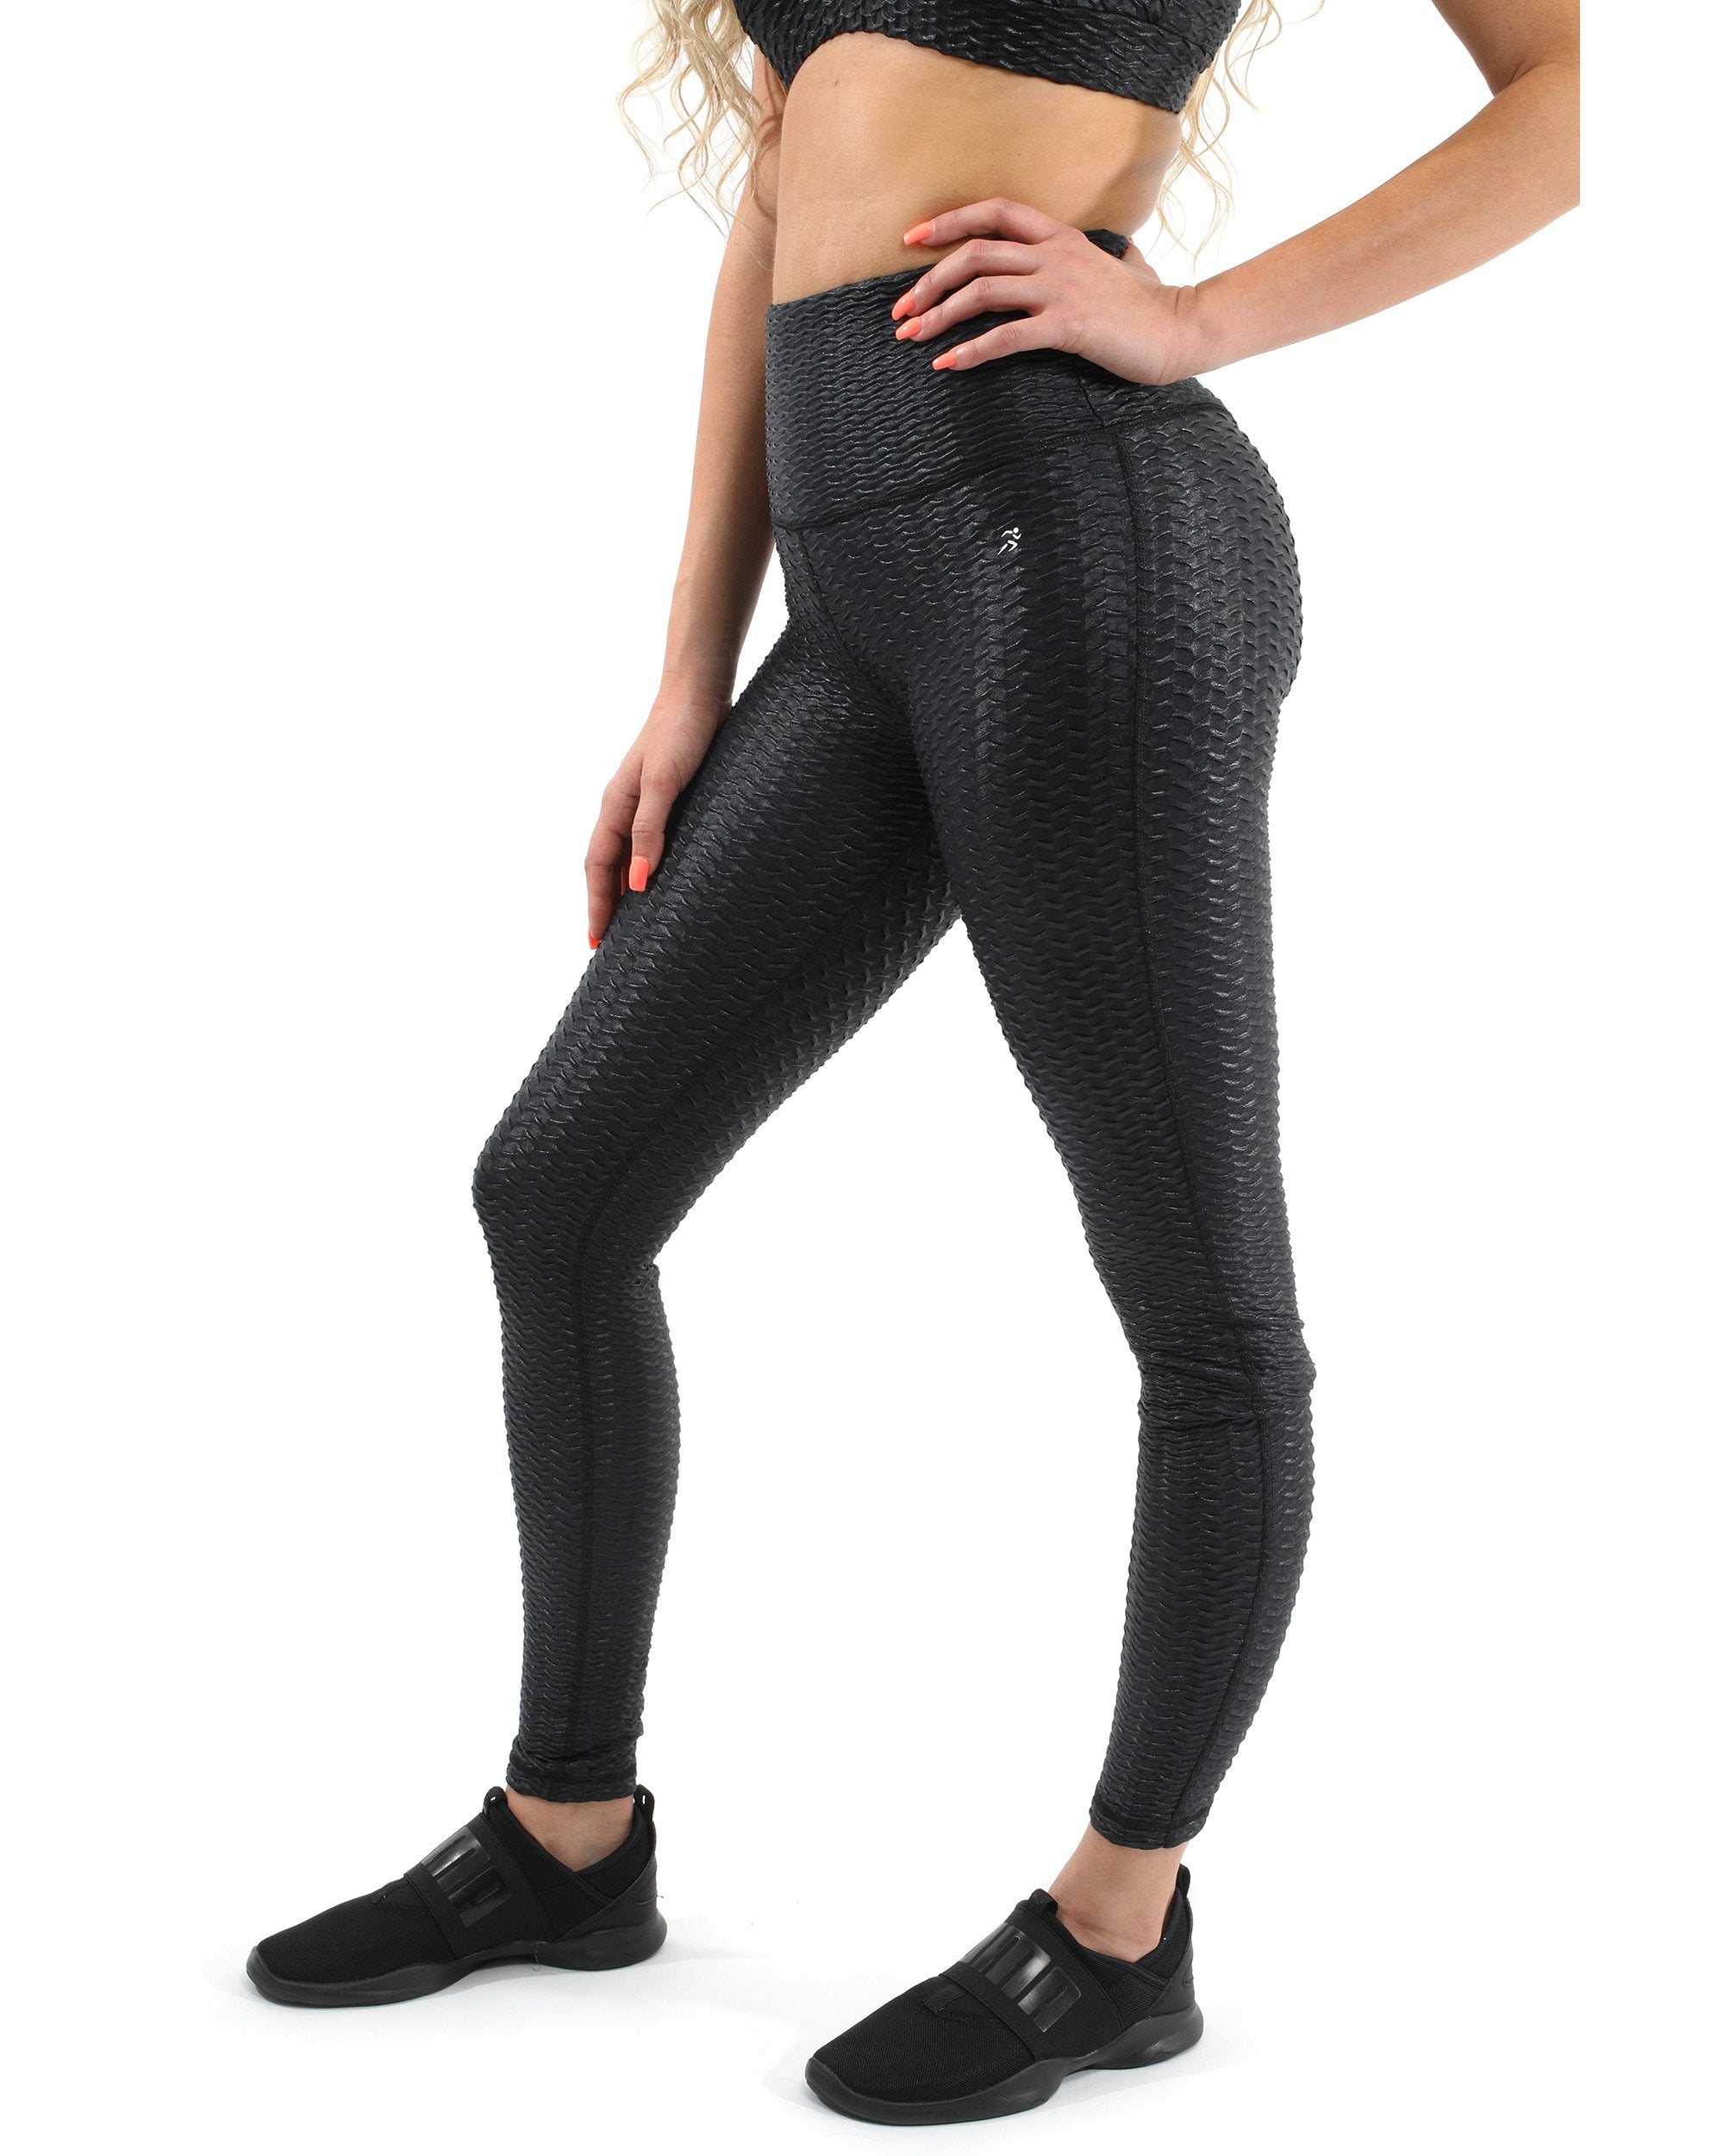 SALE! 50% OFF! Genova Activewear Set - Leggings & Sports Bra - Black [MADE IN ITALY] - Size Small